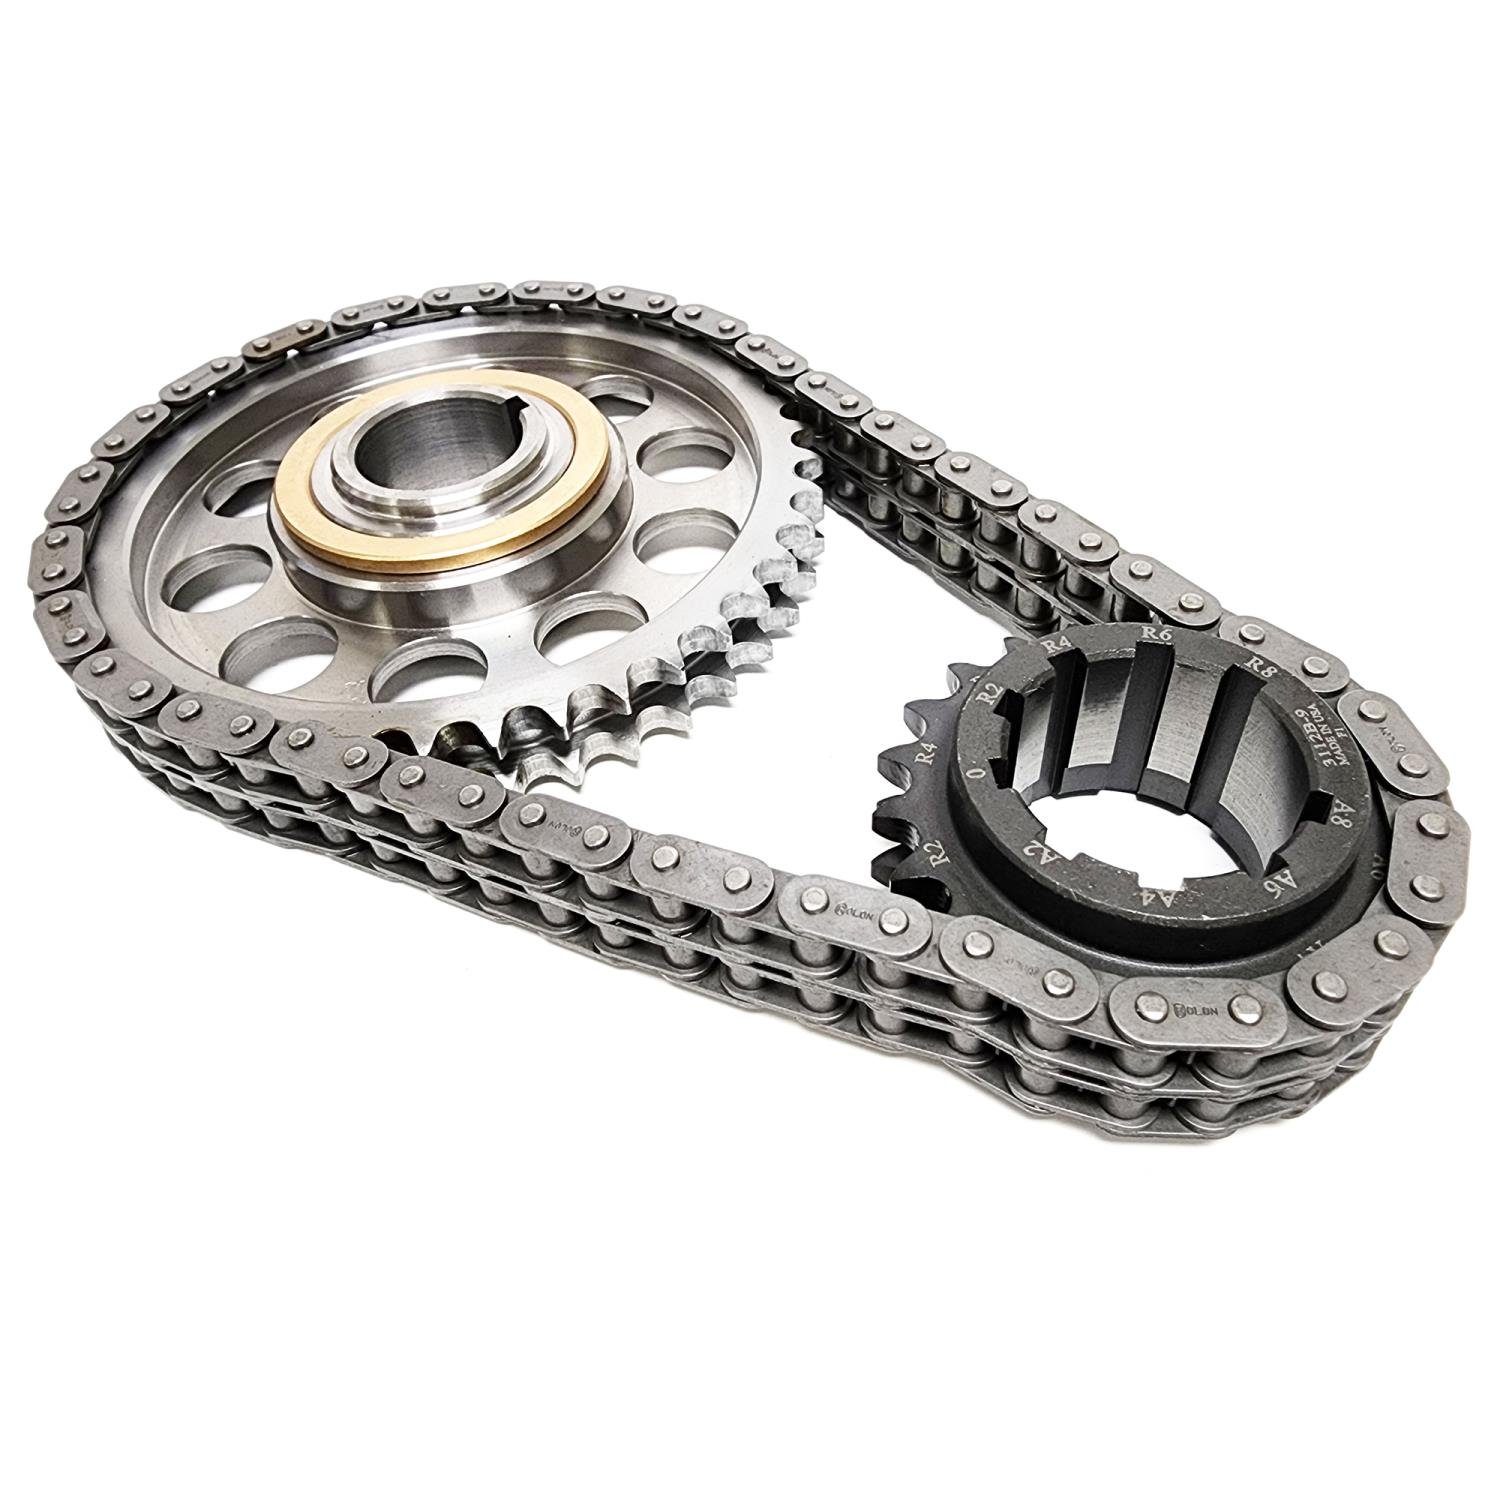 Double-Roller Timing Chain and Gear Set for 2006-2010 GM LS7